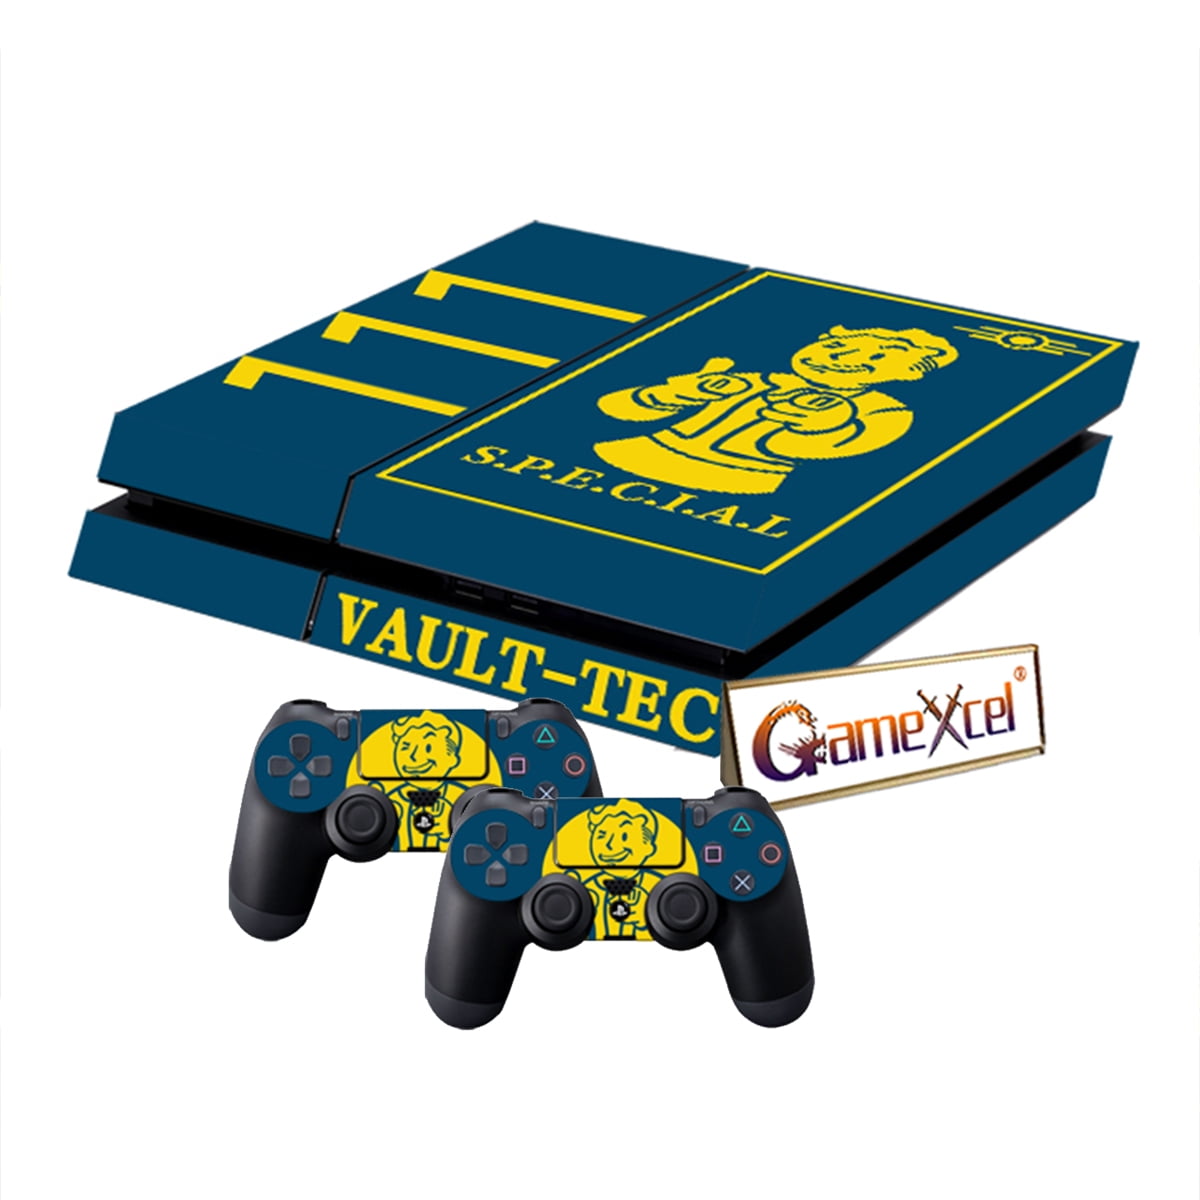 Distribuere øverst Åben GameXcel Vinyl Decal Protective Skin Cover Sticker for Sony PS4 Console and  2 Dualshock Controllers -VaultBoy, Athlete - Walmart.com